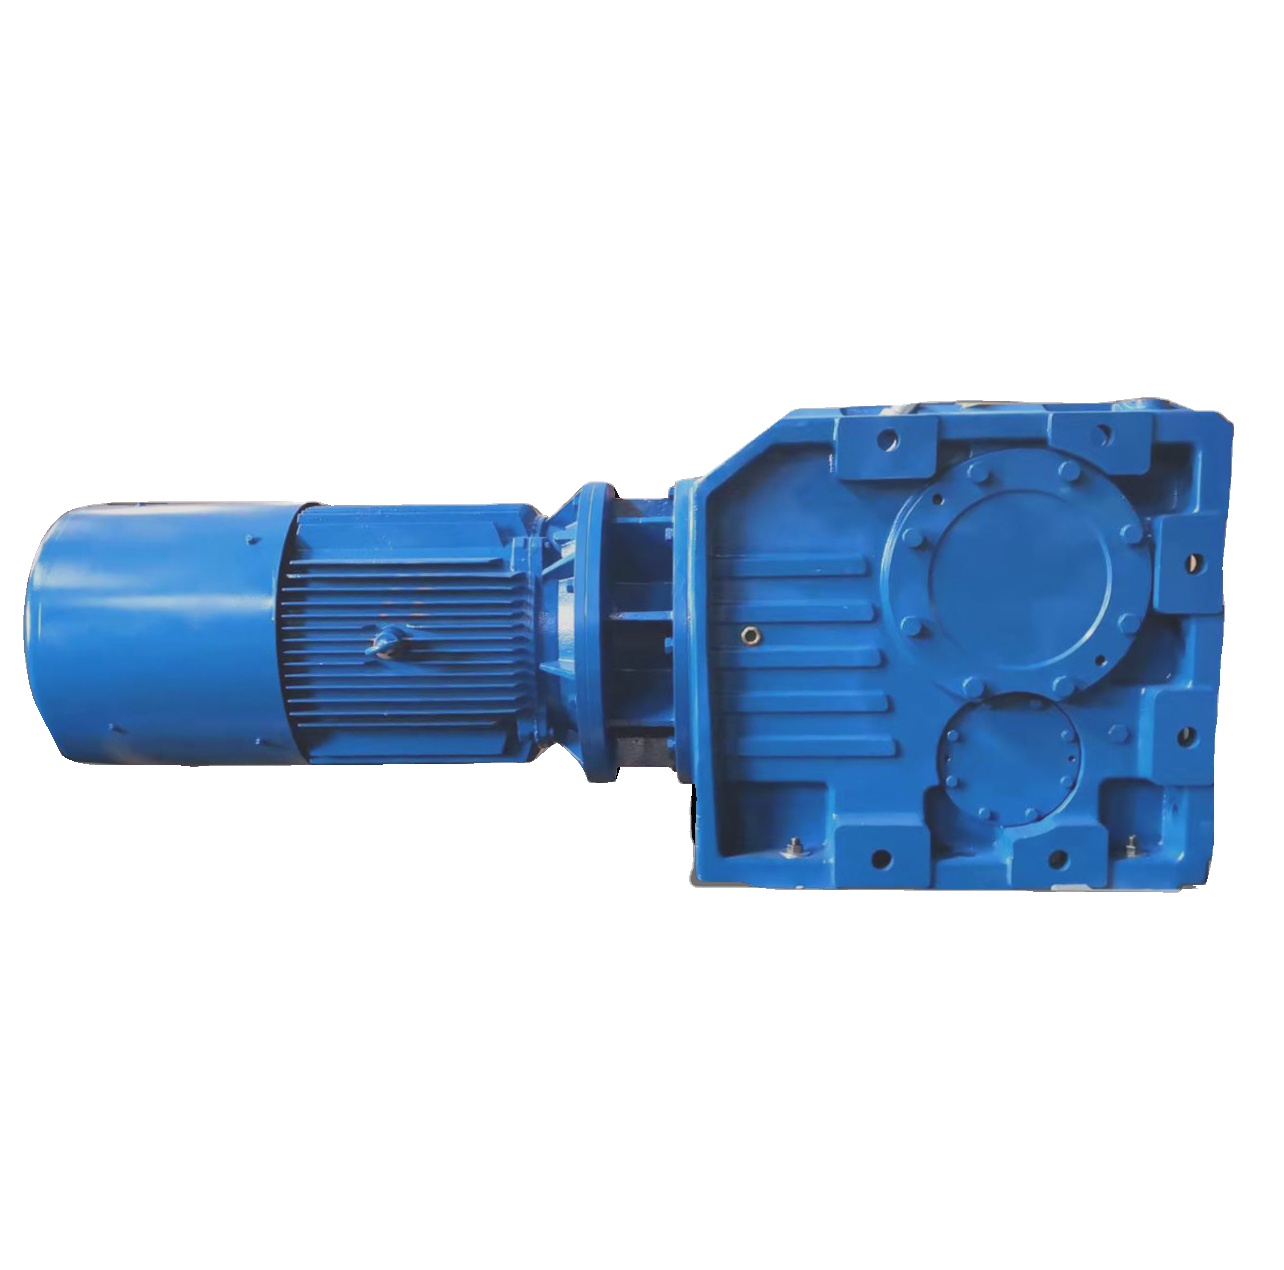 EVERGEAR DRIVE K series right angle IEC EX/ATEX explosionproof/flame proof geared motor, SPEED REDUCER